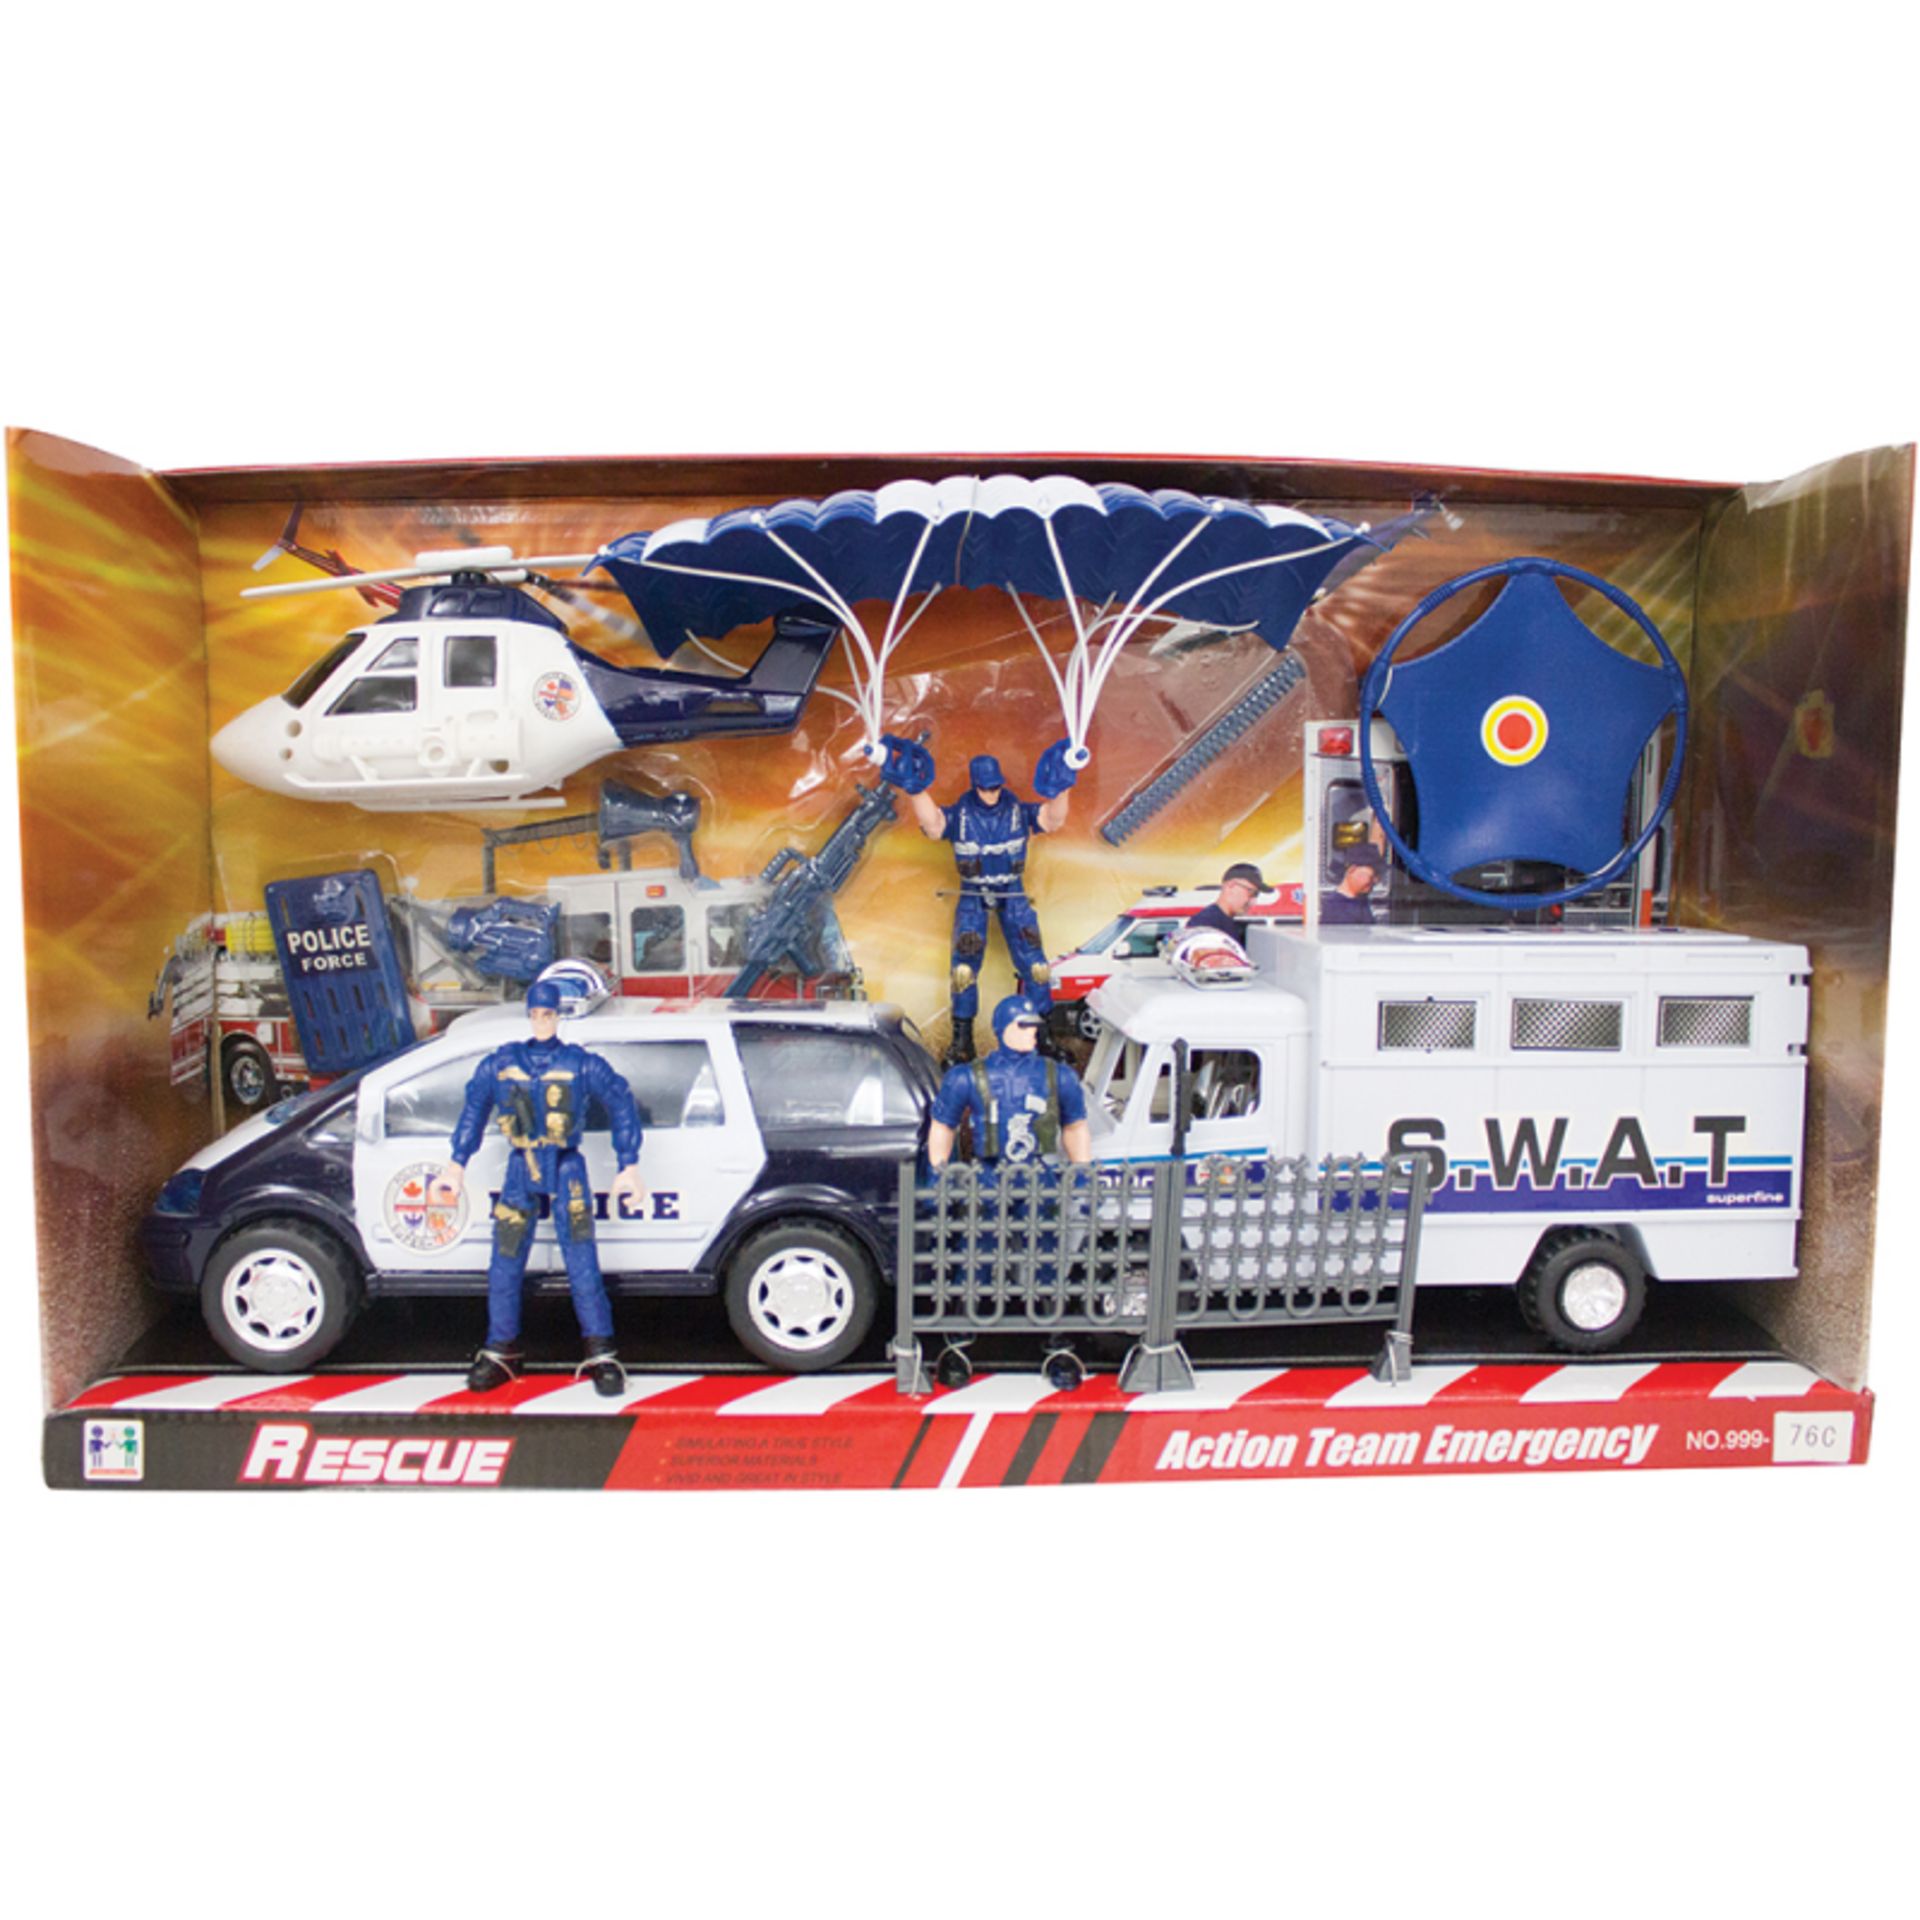 + VAT Brand New Action Team Emergency Rescue Play Set With Helicopter - Police Car SWAT Vehicle -